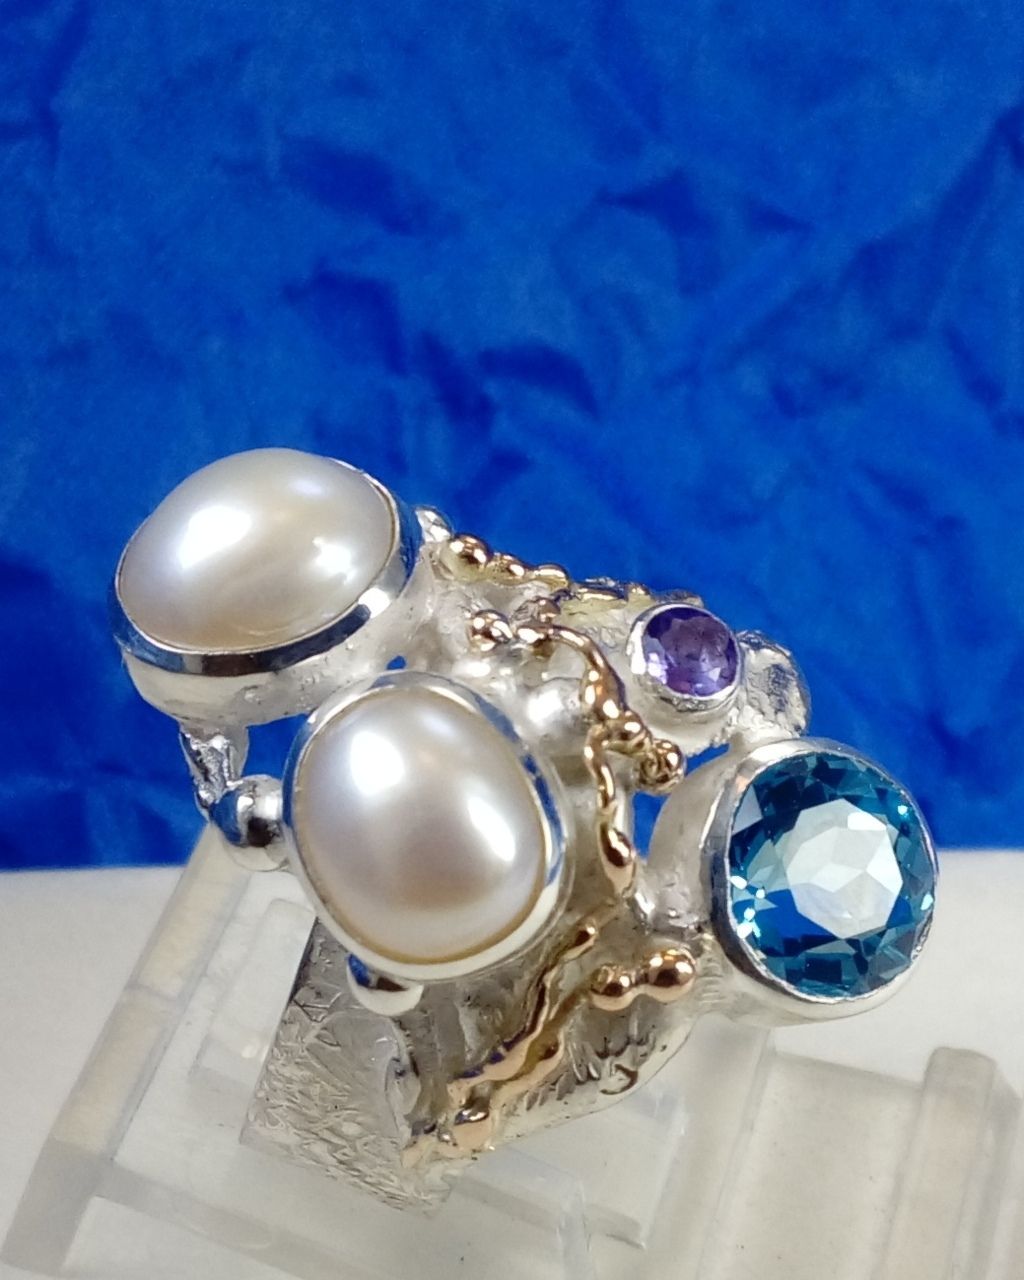 natural pearl and gemstone handcrafted jewelry, silver jewelry with color stones, contemporary jewellery collectible, fine jewellery with gemstones for aucitons, art jewelry with facet cut gemstones and natural pearls, contemporary jewelry with real stones, contemporary jewelry made by artist, Gregory Pyra Piro ring 7320, jewelry with amethyst and blue topaz together, rings for women with topaz and pearl together, rings for women with amethyst and pearl together,jewellery artist in Europe, designer jewellery sold at auctions and art galleries, where to find auctions with fine art and designer jewellery, bidding on auctions with designer jewellery, rings for women with amethyst and blutopaz, rings sold in art and craft galleries